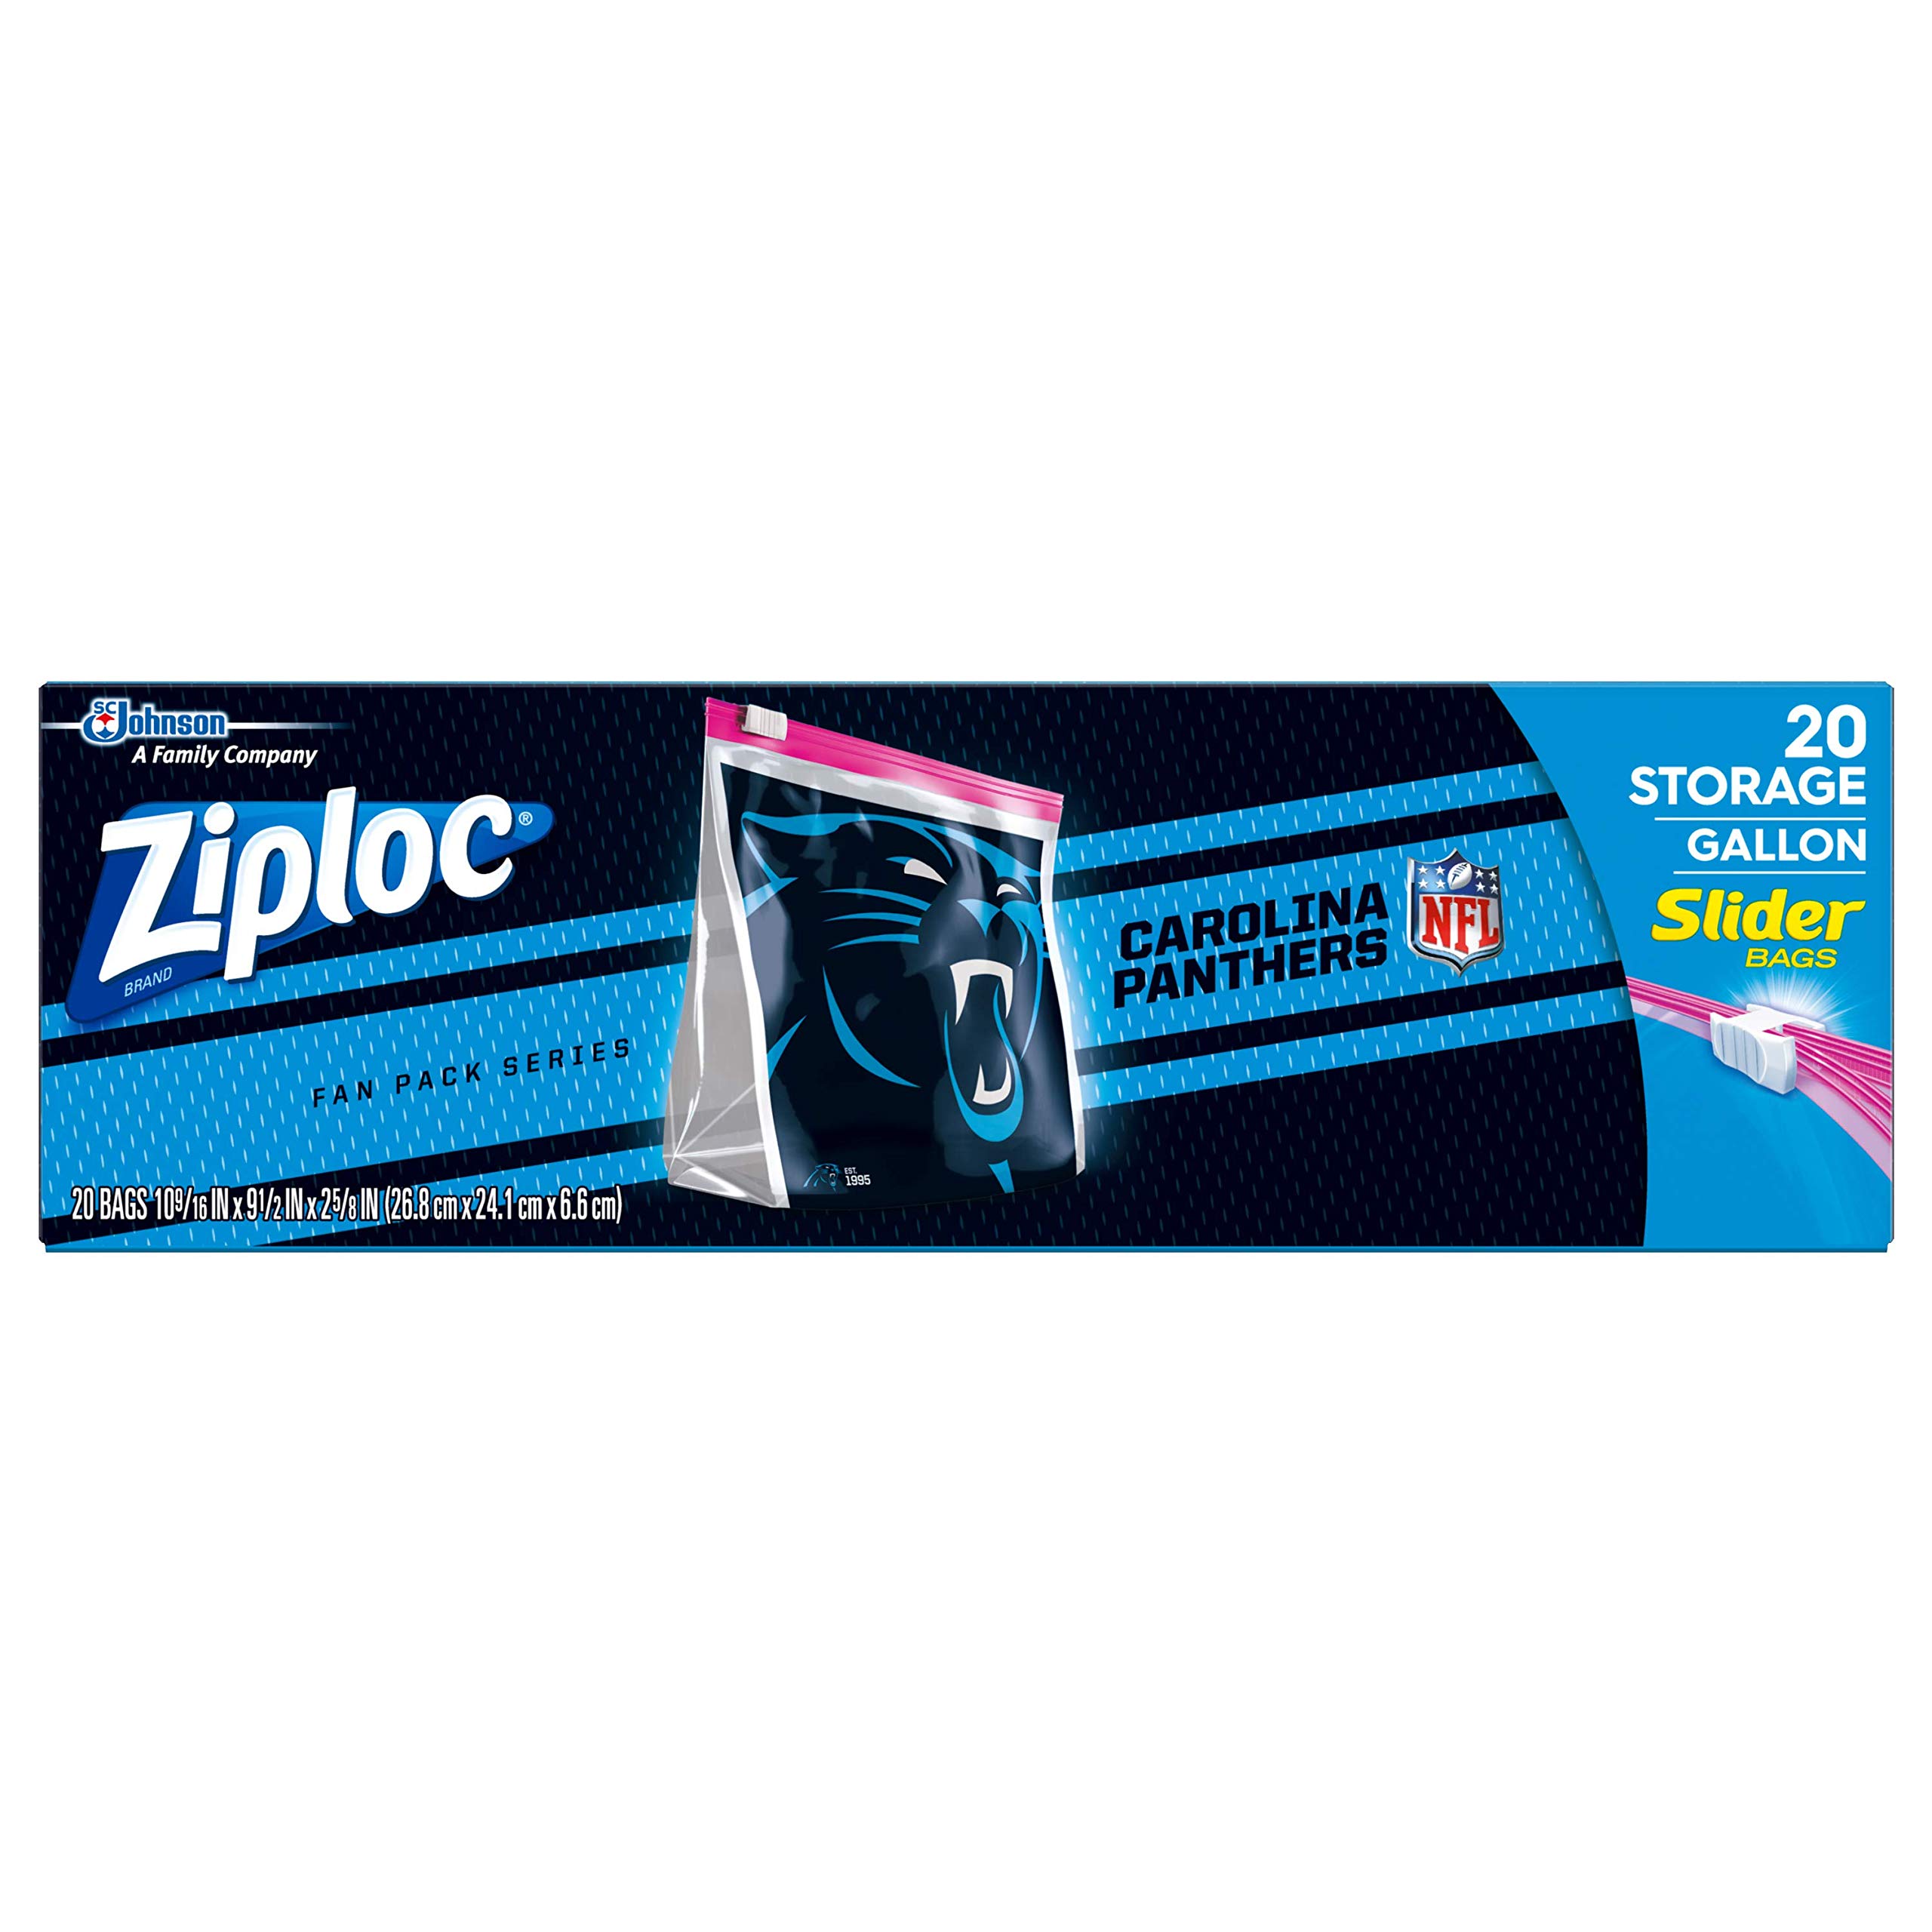 Ziploc Slider Storage Gallon Bag Great for Grab-and-go Snacking Tailgating  or homegating 20 Count- NFL North Carolina Panthers